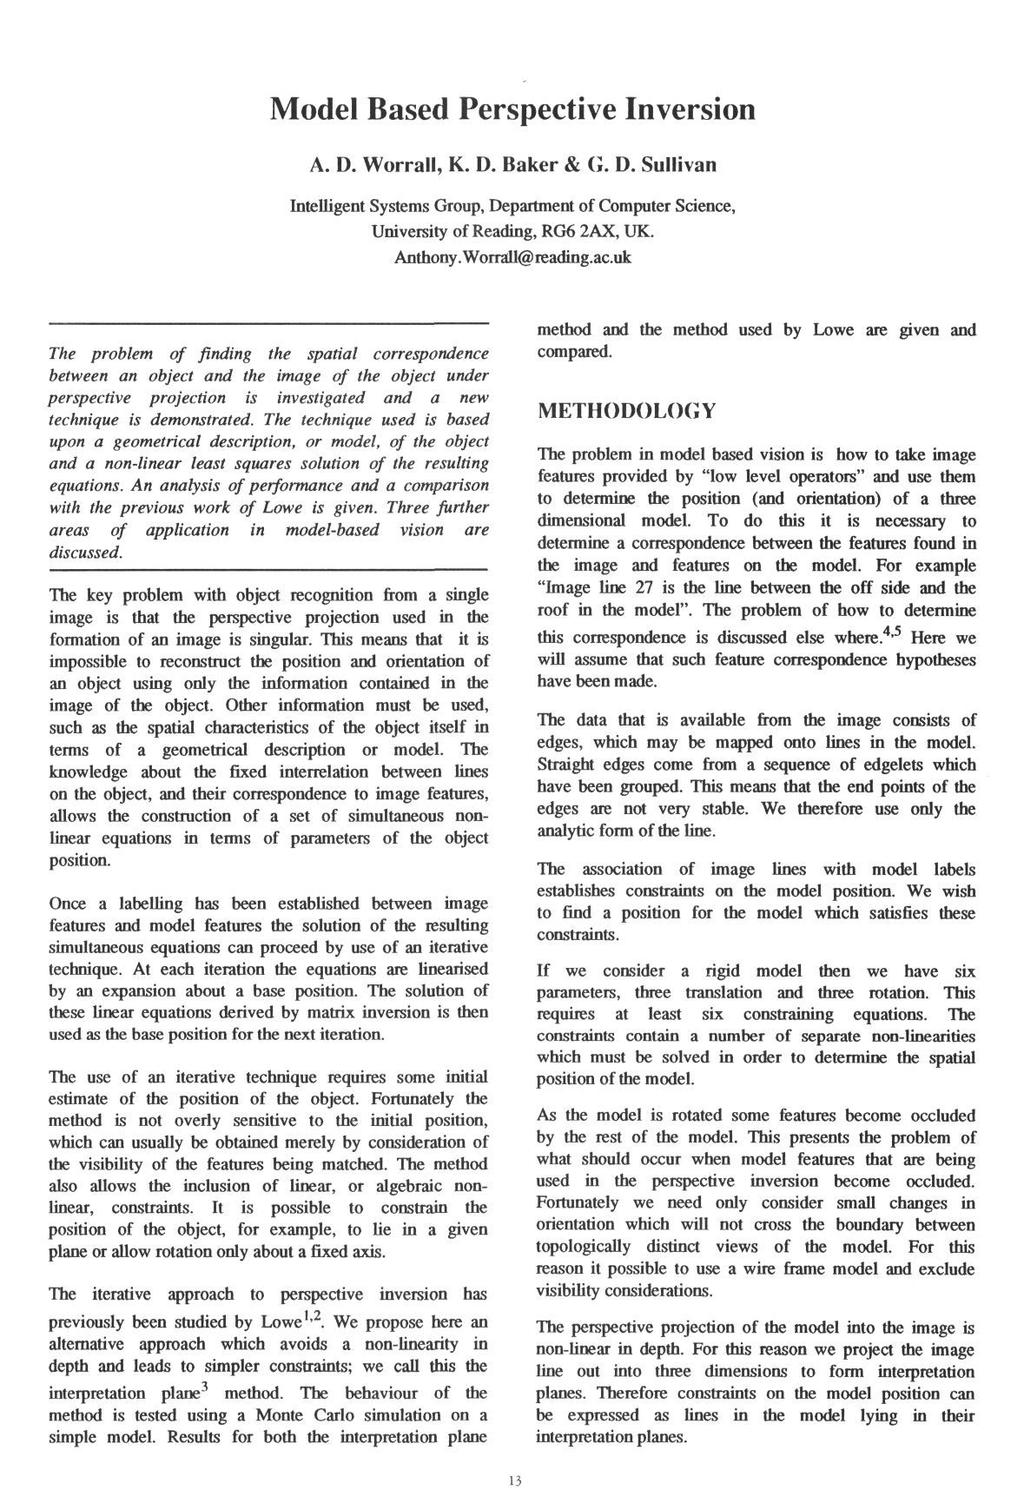 Model Based Perspective Inversion A. D. Worrall, K. D. Baker & G. D. Sullivan Intelligent Systems Group, Department of Computer Science, University of Reading, RG6 2AX, UK. Anthony.Worrall@reading.ac.